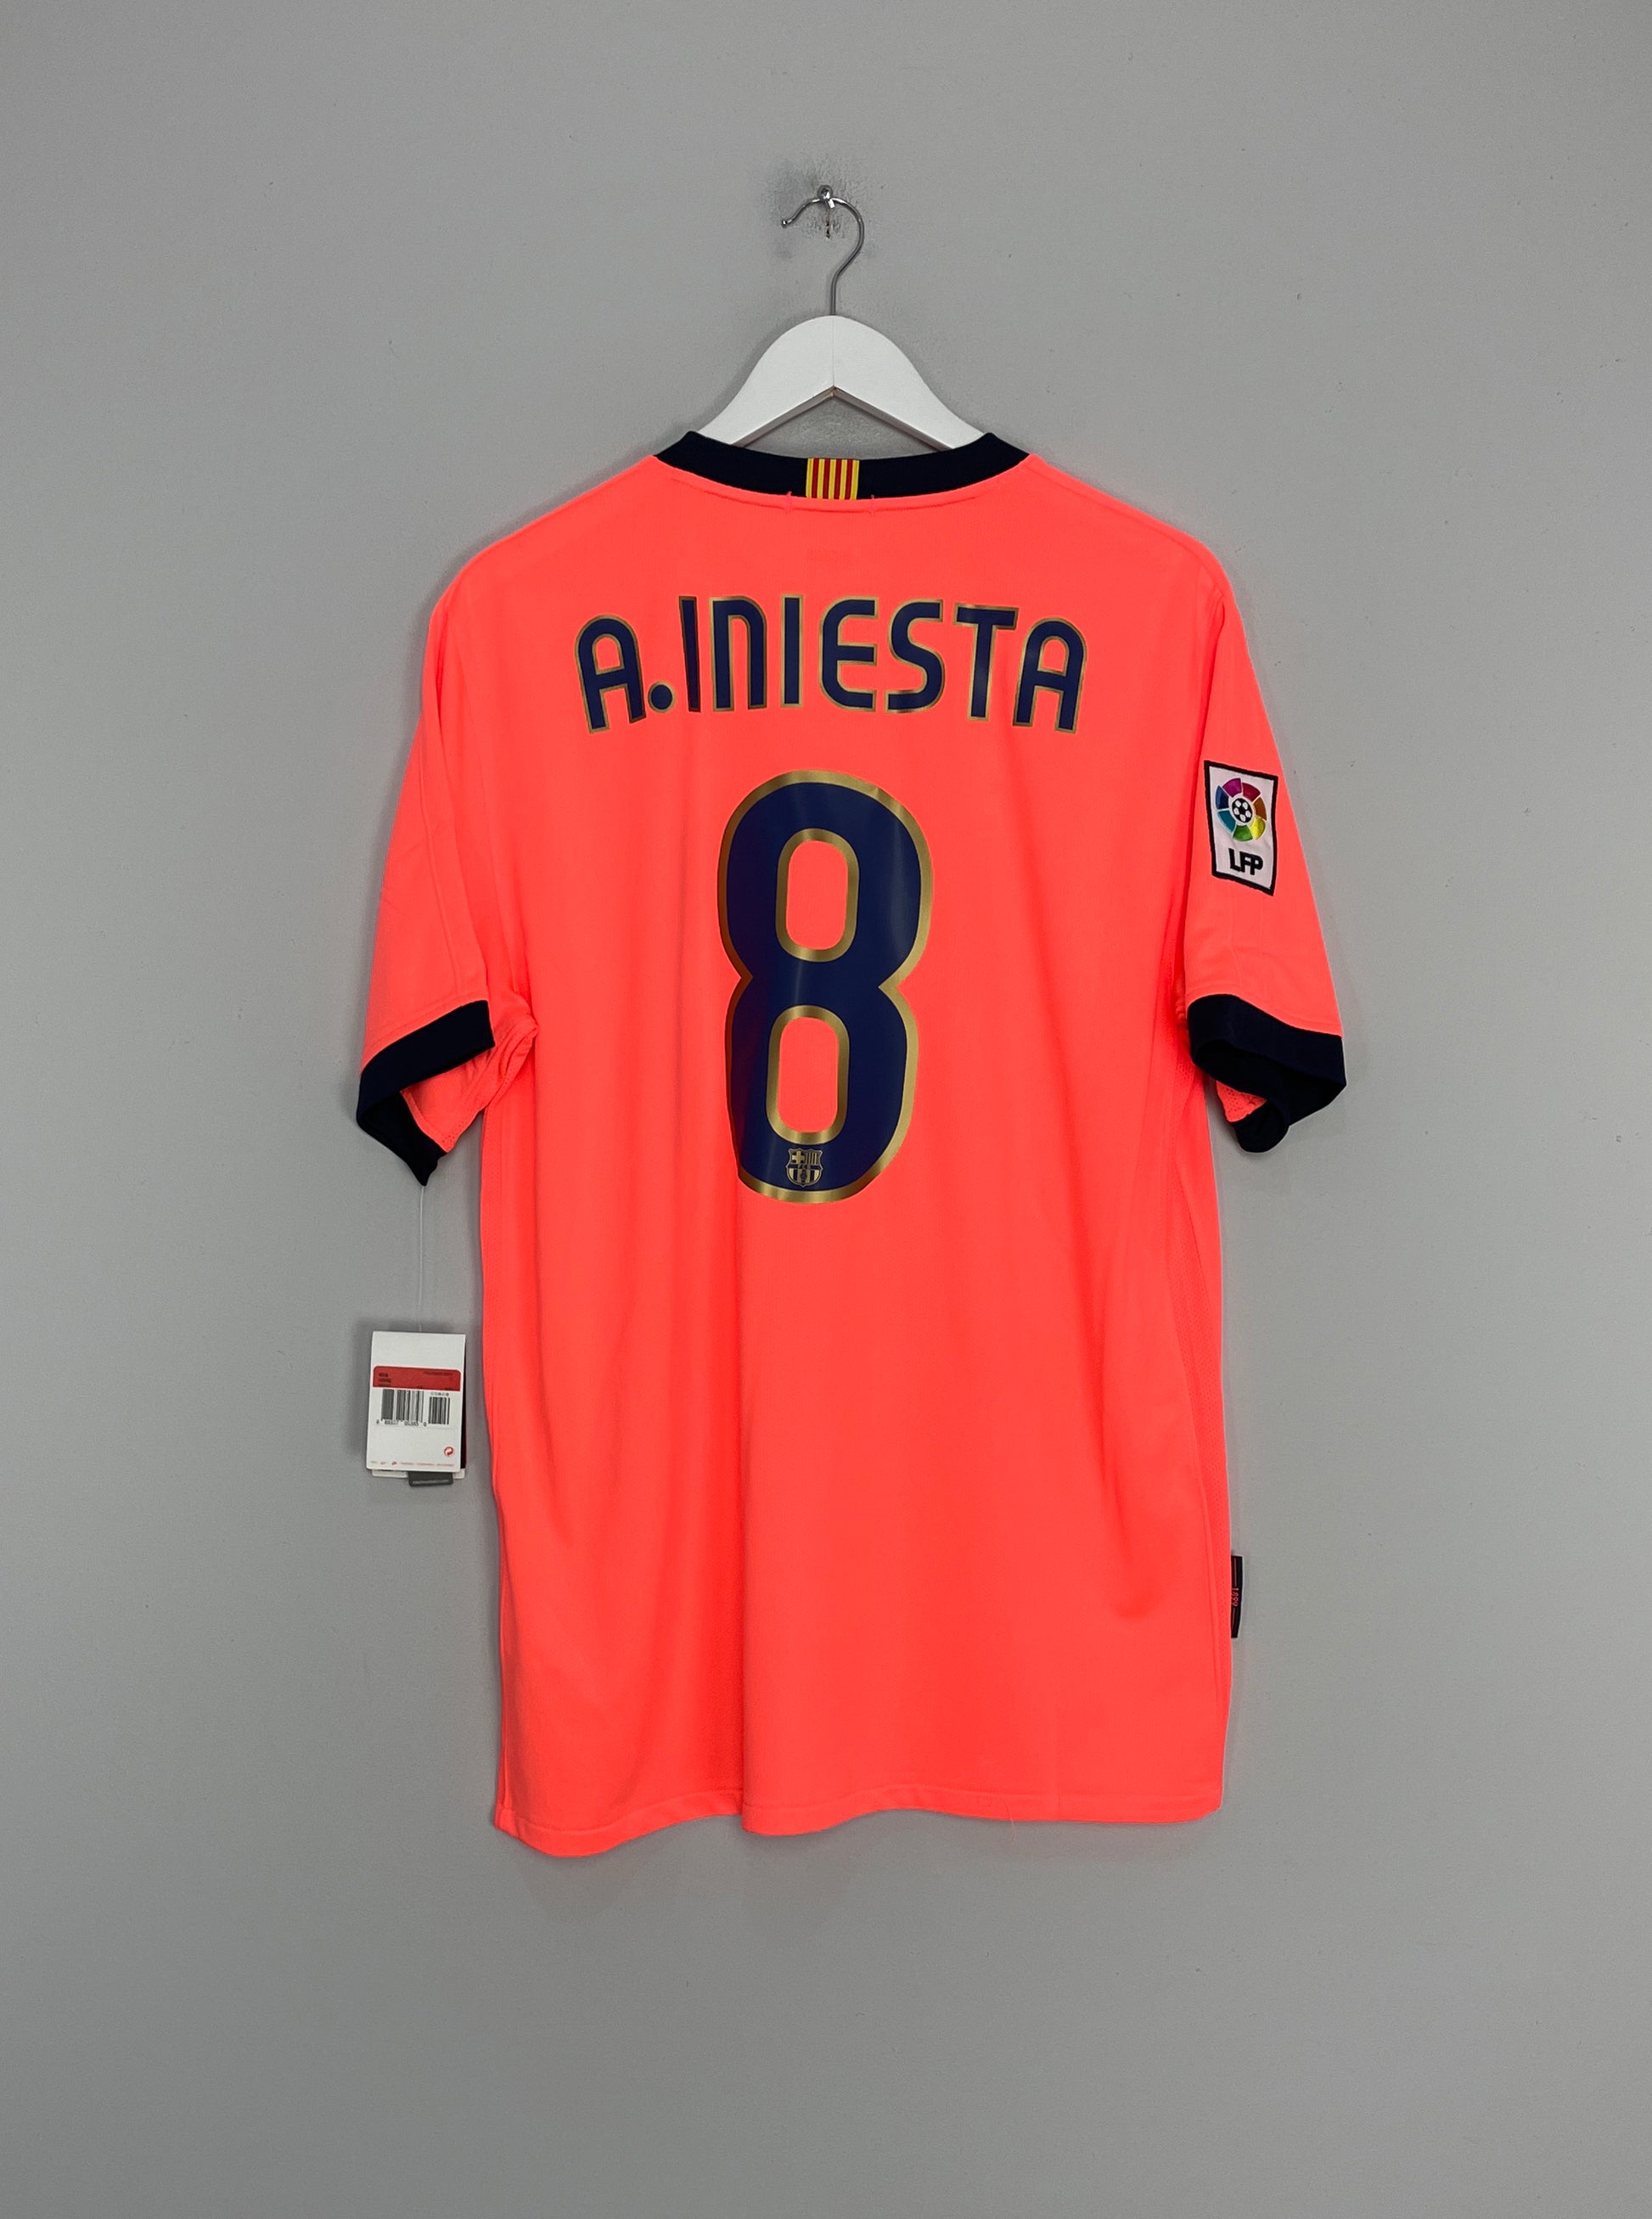 Image of the Barcelona Iniesta shirt from the 2009/10 season